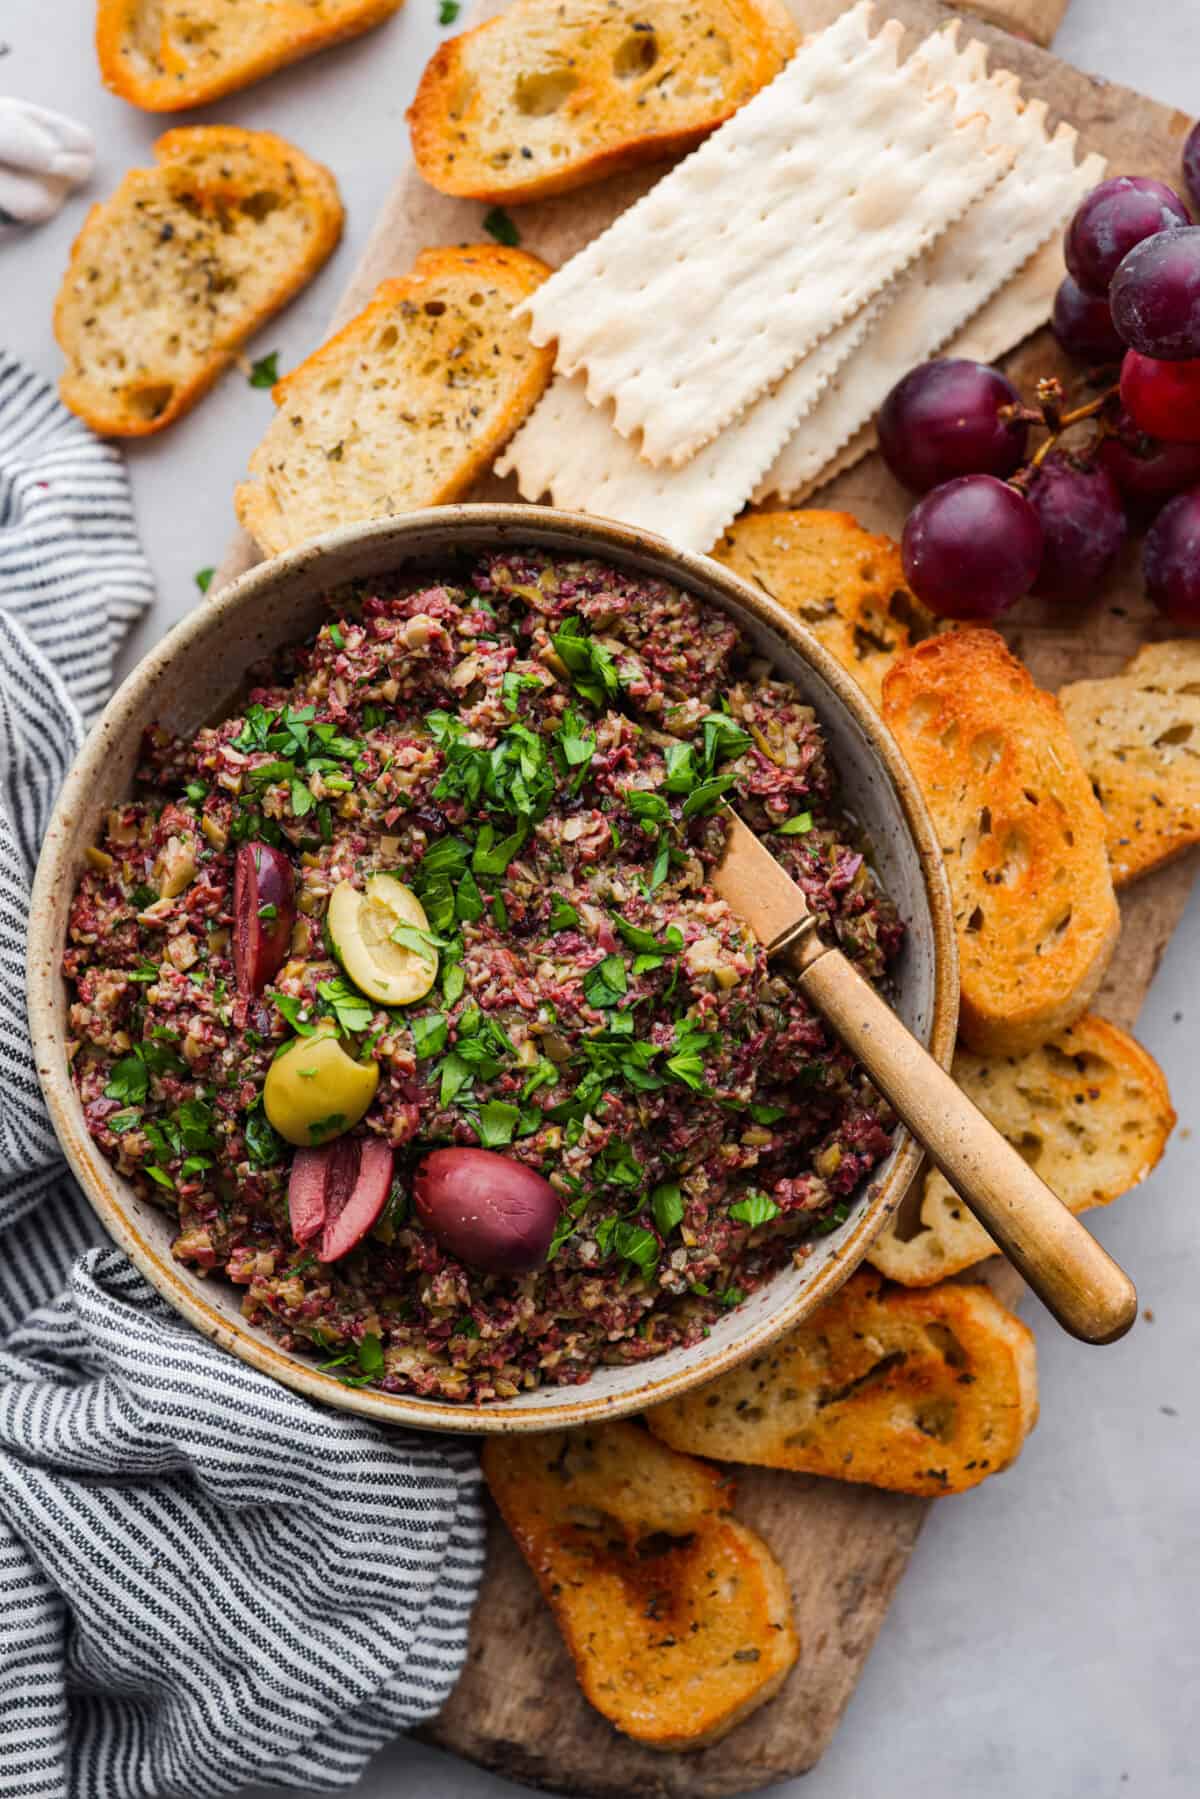 Top view of tapenade in a brown bowl served with crostini and crackers.